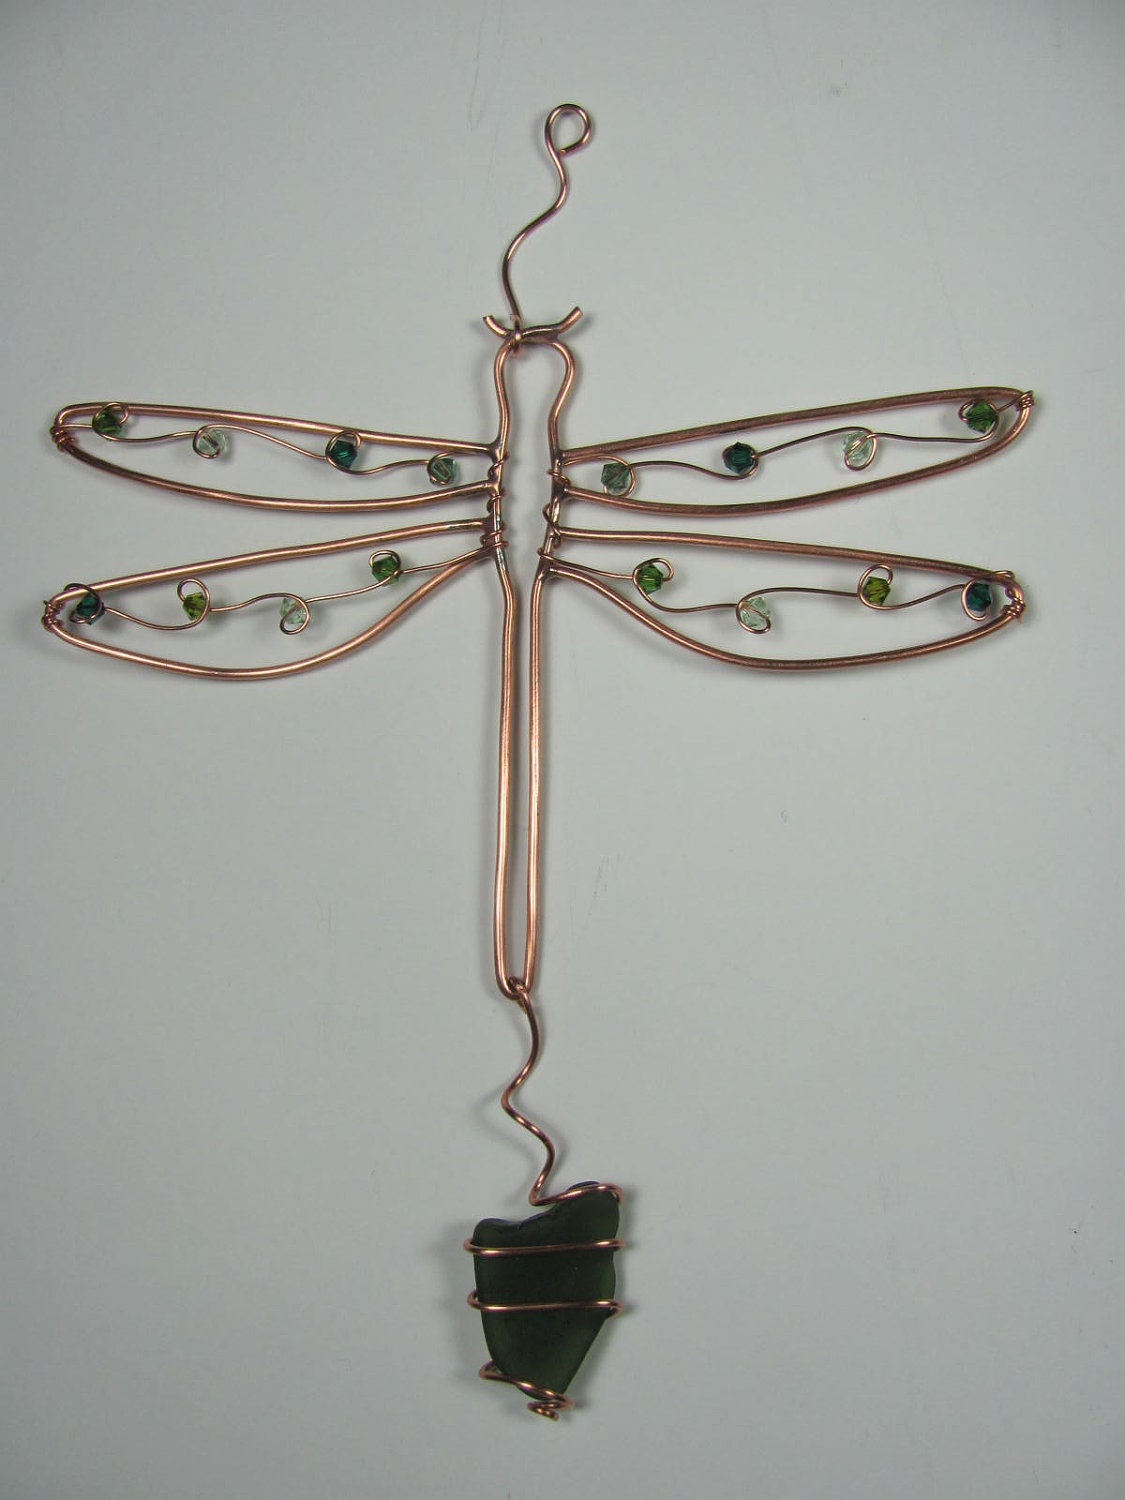 Copper wire dragonfly Christmas ornament or suncatcher, genuine seaglass and Swarovski crystals - upcycled - great holiday gift - metamorphosea